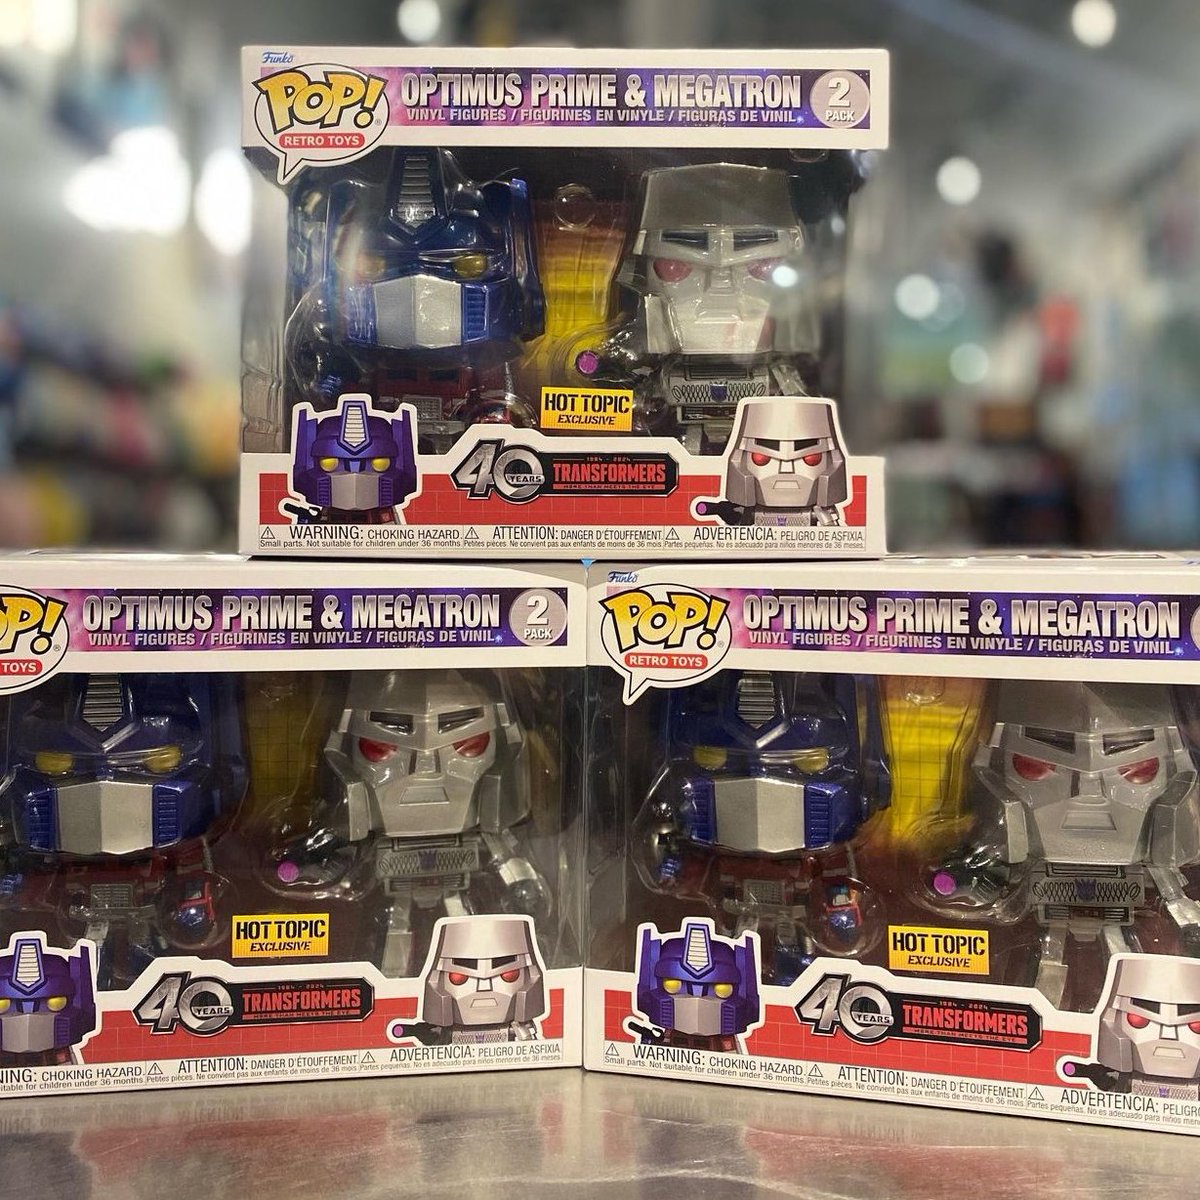 Hot Topic Exclusive Optimus Prime & Megatron Funko Pop! 2-Pack hitting stores now! 

#Transformers #Funko #FunkoPop #FunkoPops #FunkoPopVinyl #Pop #PopVinyl #FunkoCollector #Collectible #Collectibles #Toy #Toys #FunkoFinderz